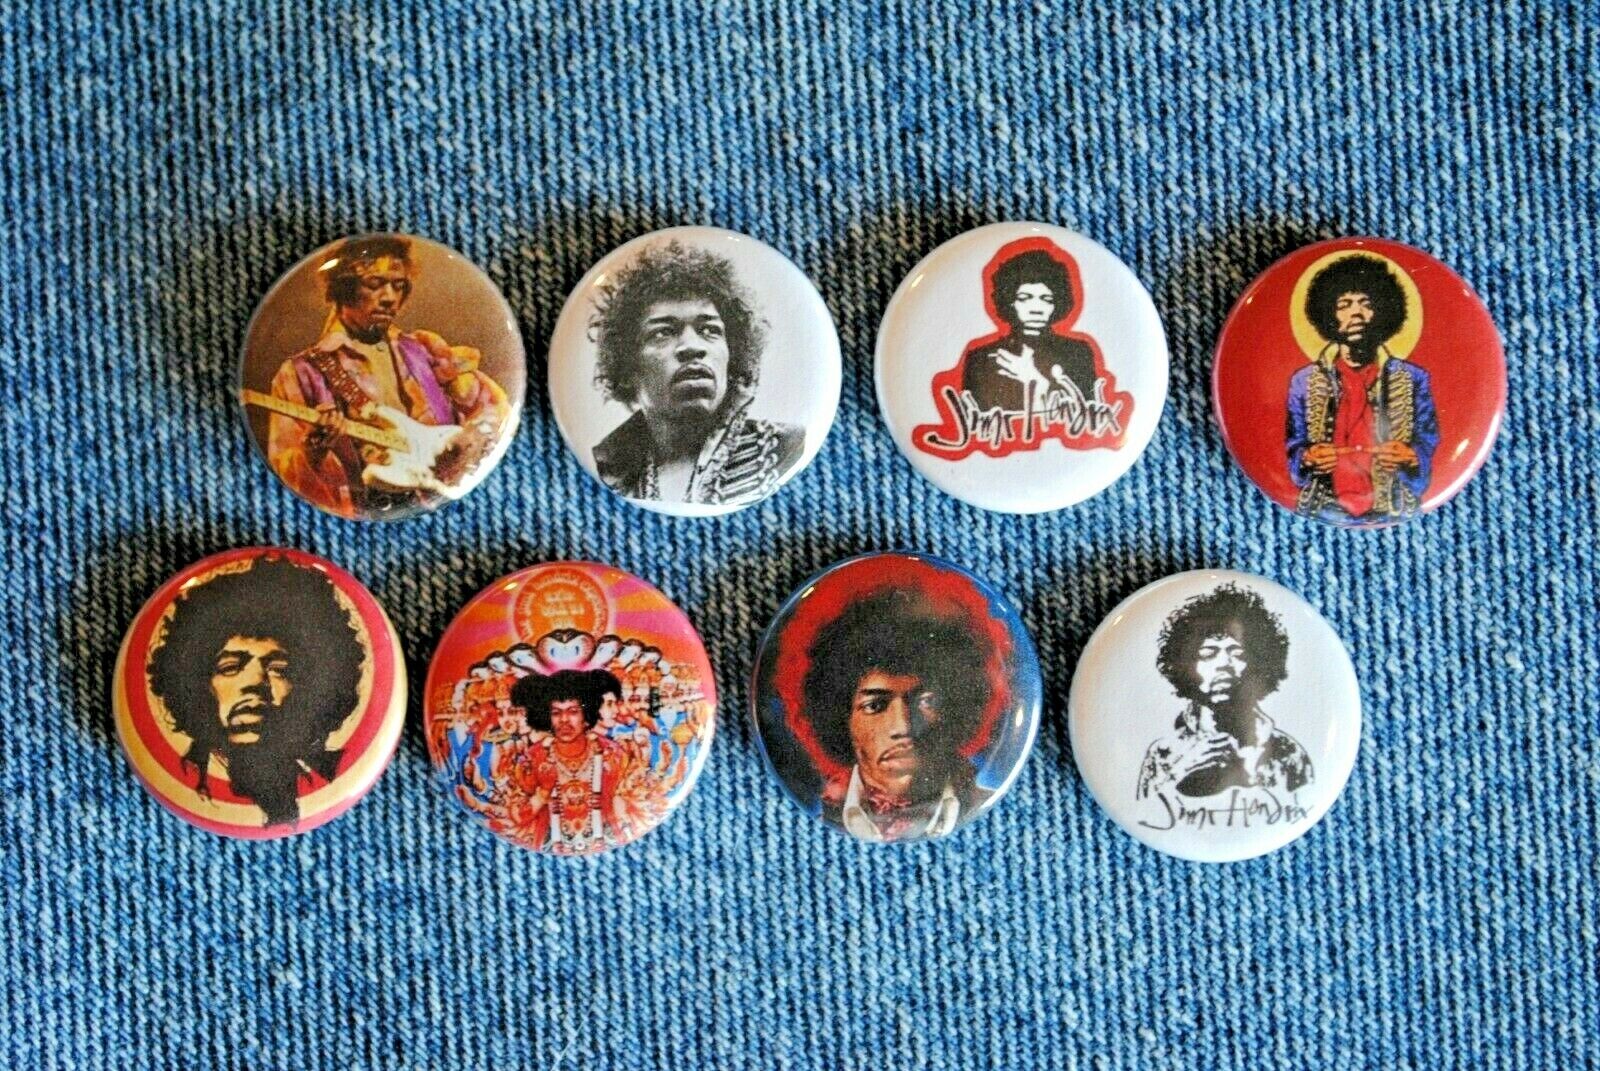 Jimi Hendrix Band Buttons Pins Music 1 Inch Badge Lot pinback Hat guitar Jimmy